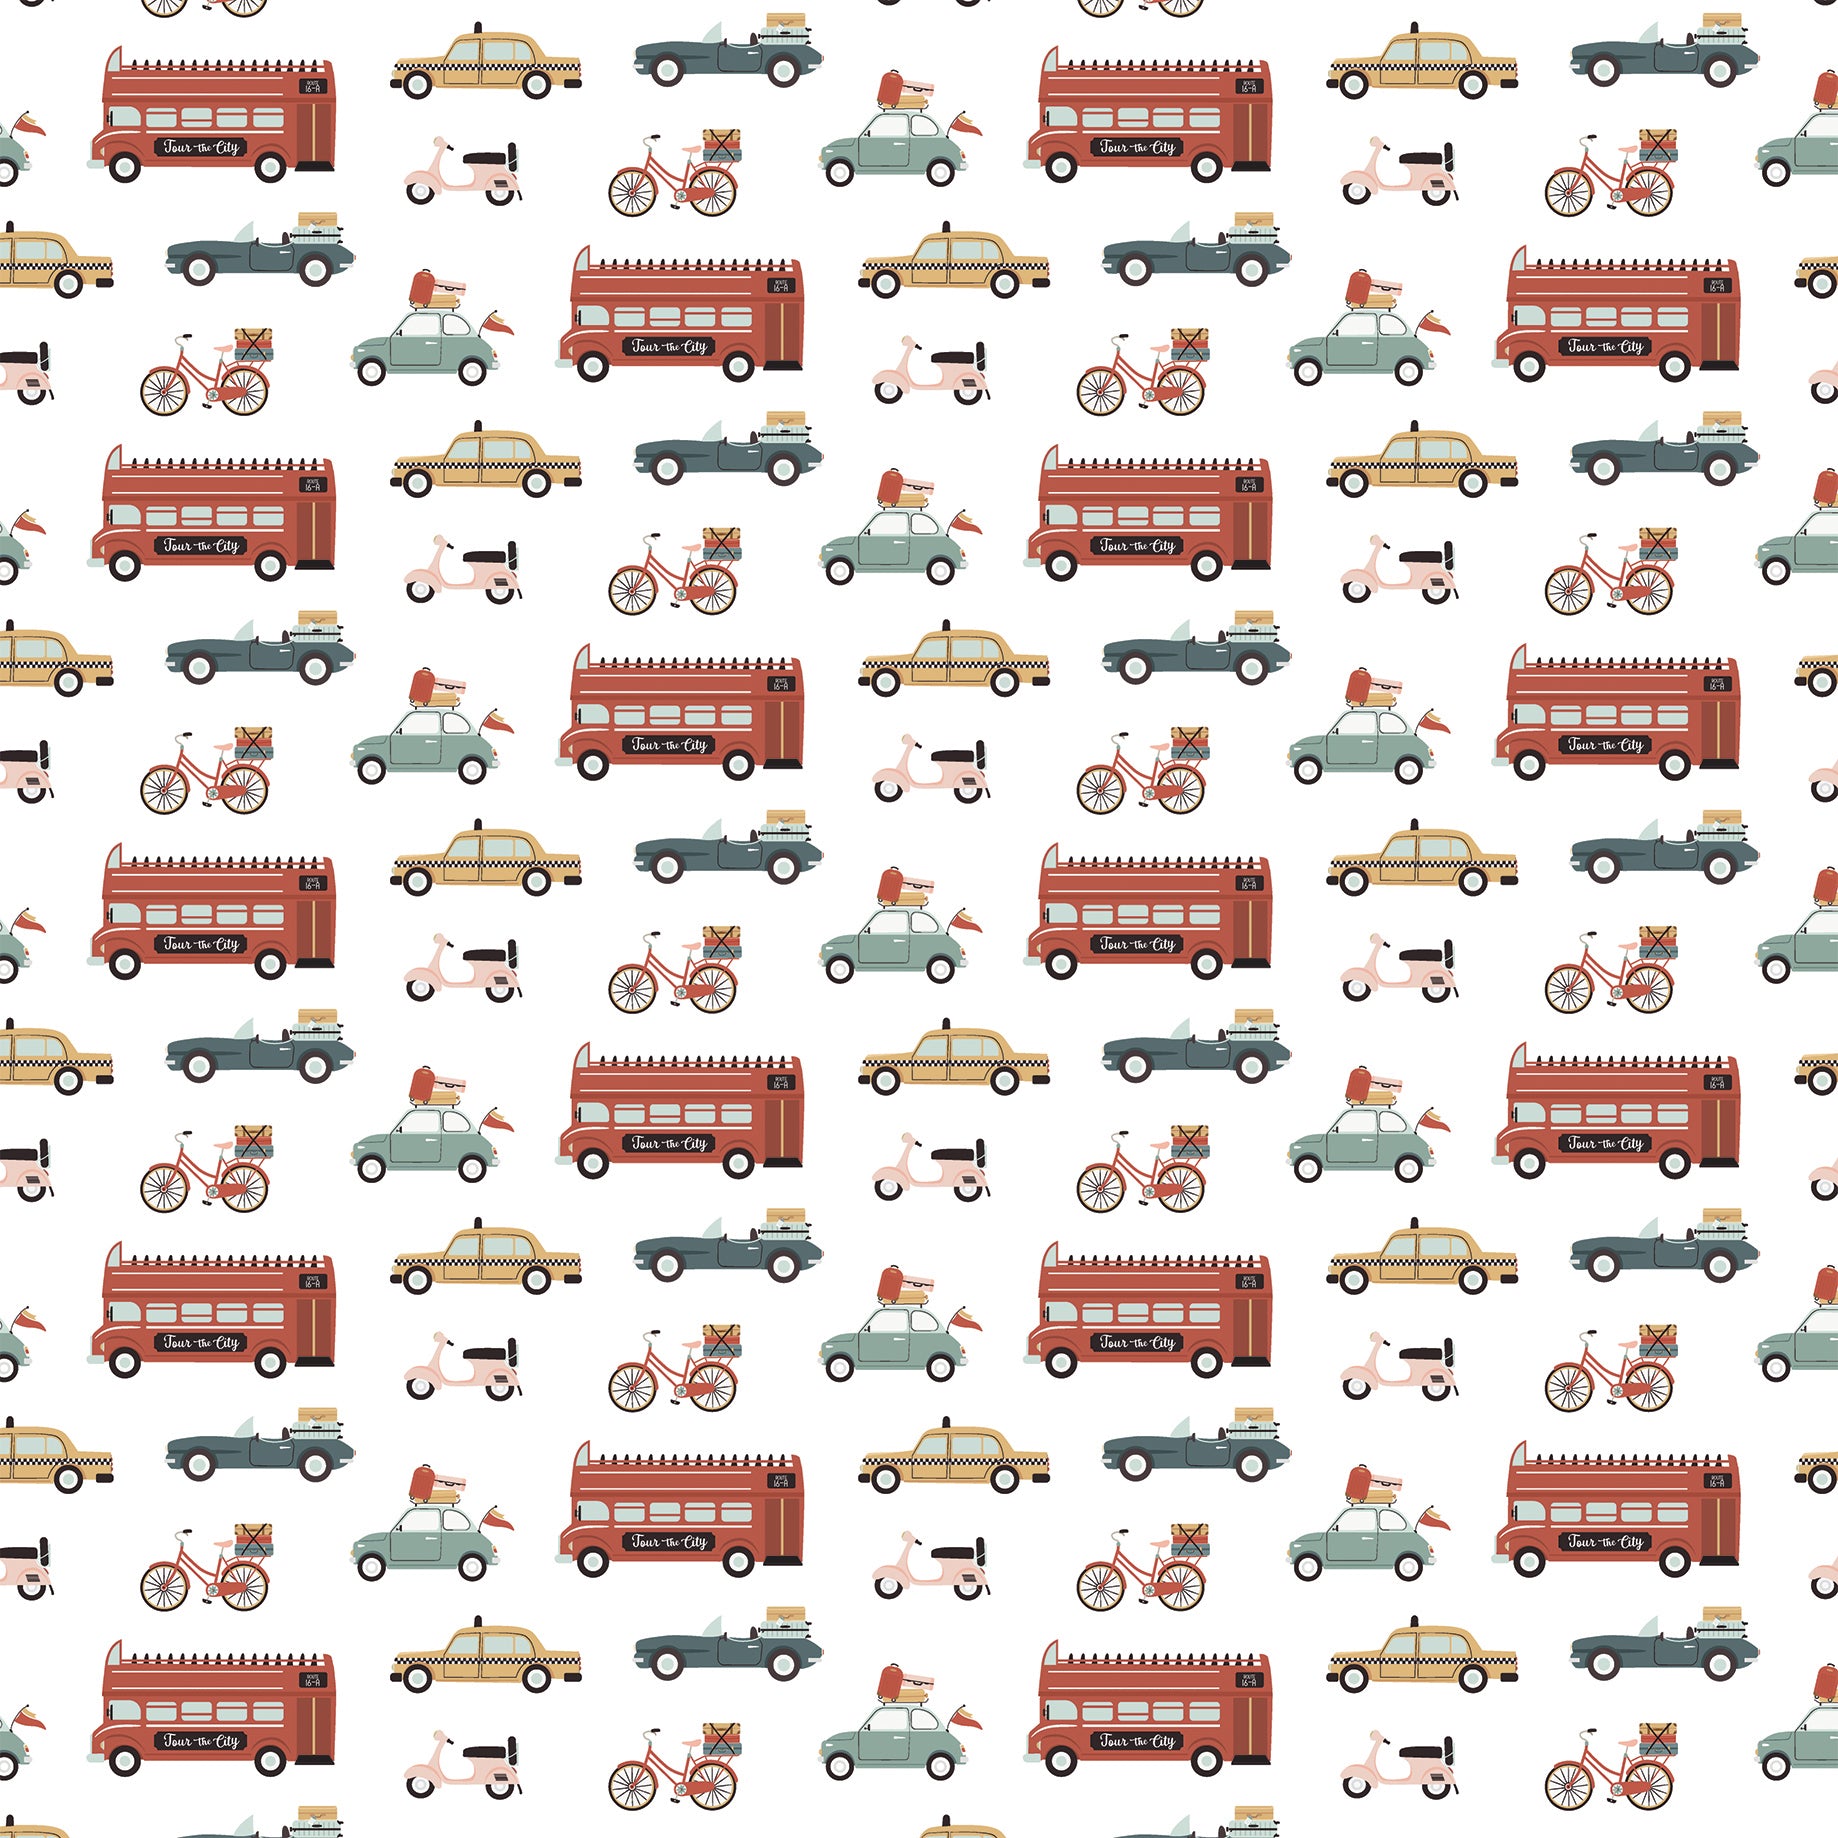 Let's Take the Trip Collection Touring Transportation 12 x 12 Double-Sided Scrapbook Paper by Echo Park Paper